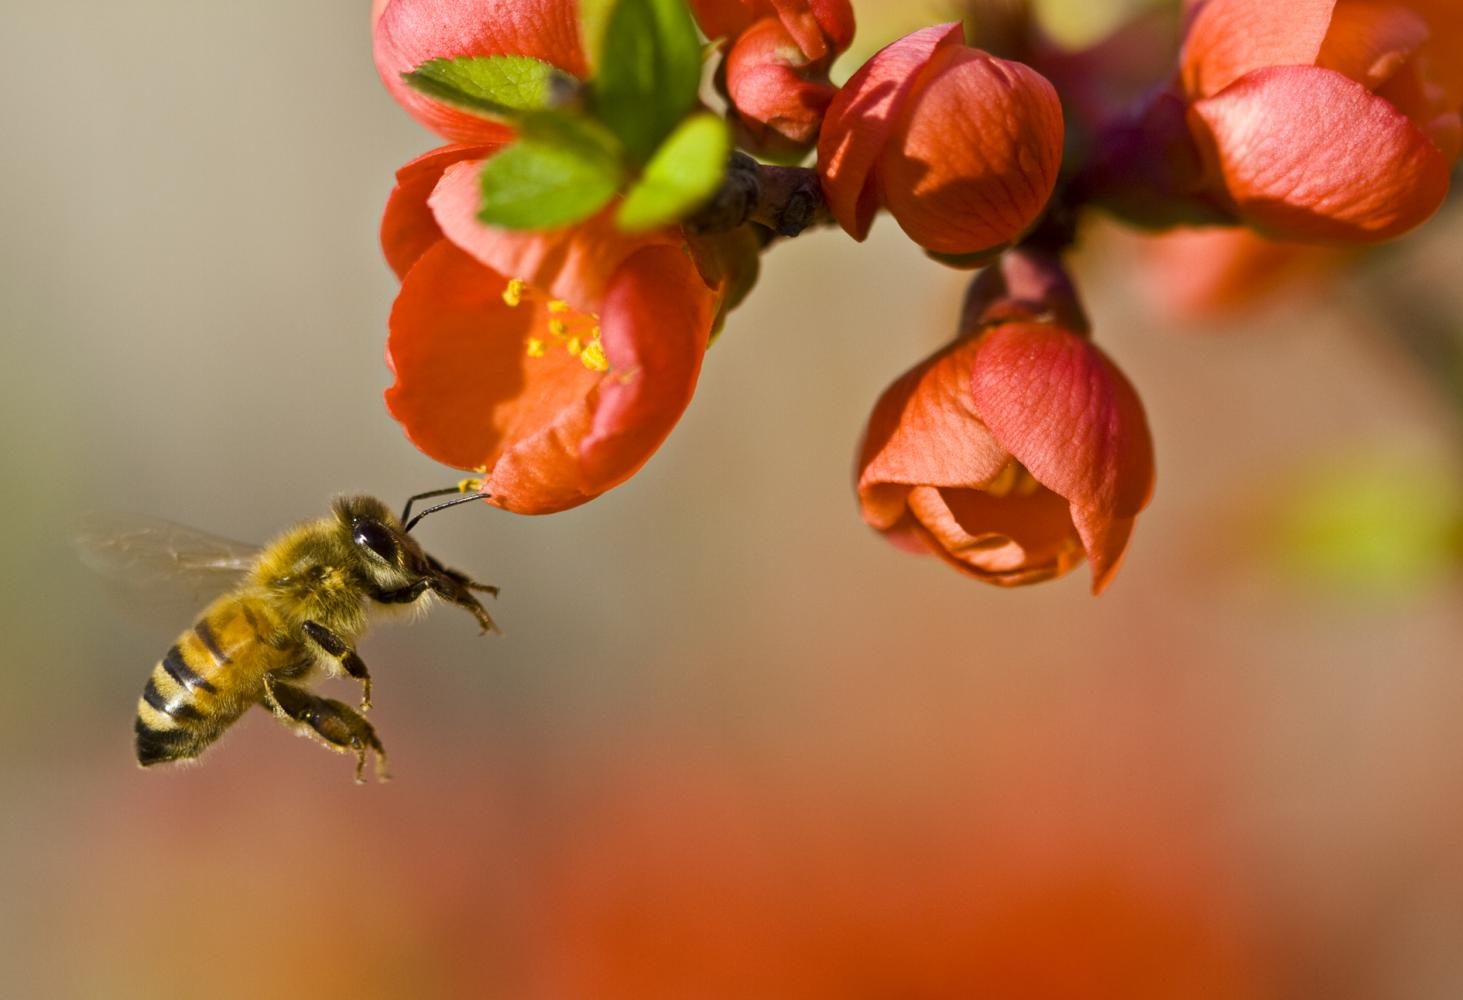 The honey bee population is slowly falling and our planet may face serious issues with a lack of bees.